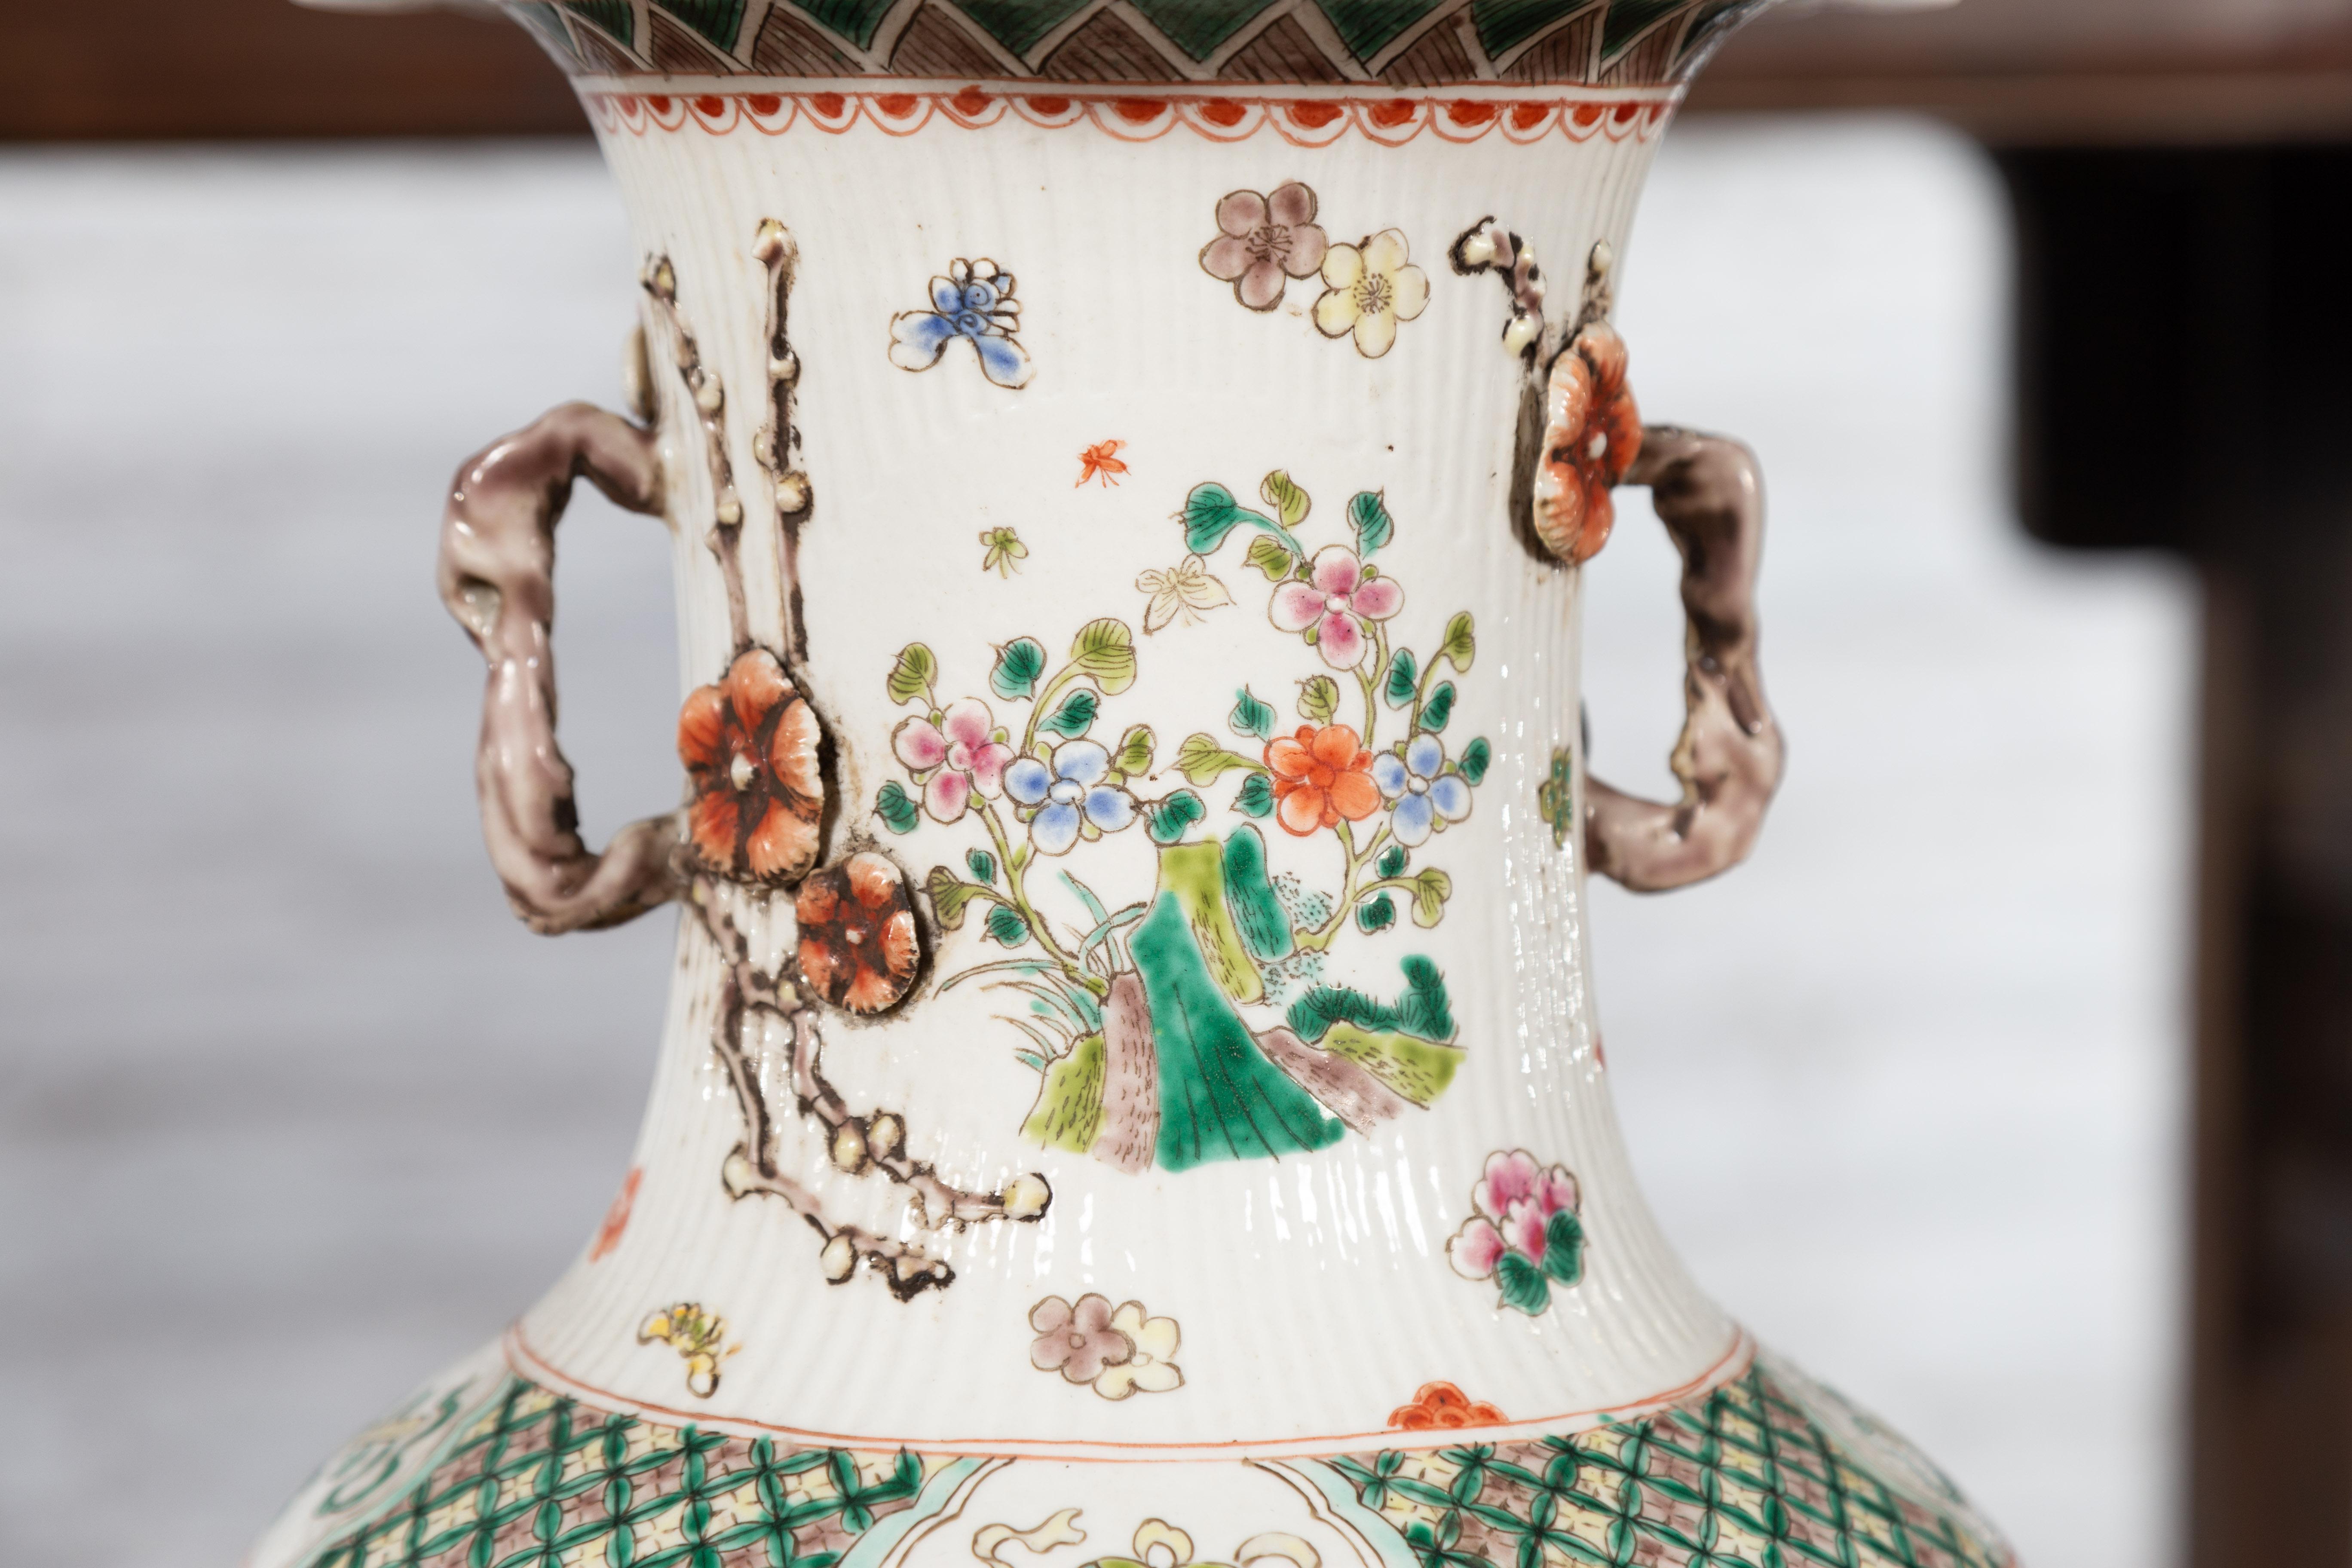 Antique Chinese Porcelain Vases with Hand-Painted Flowers and Mythical Animals 6